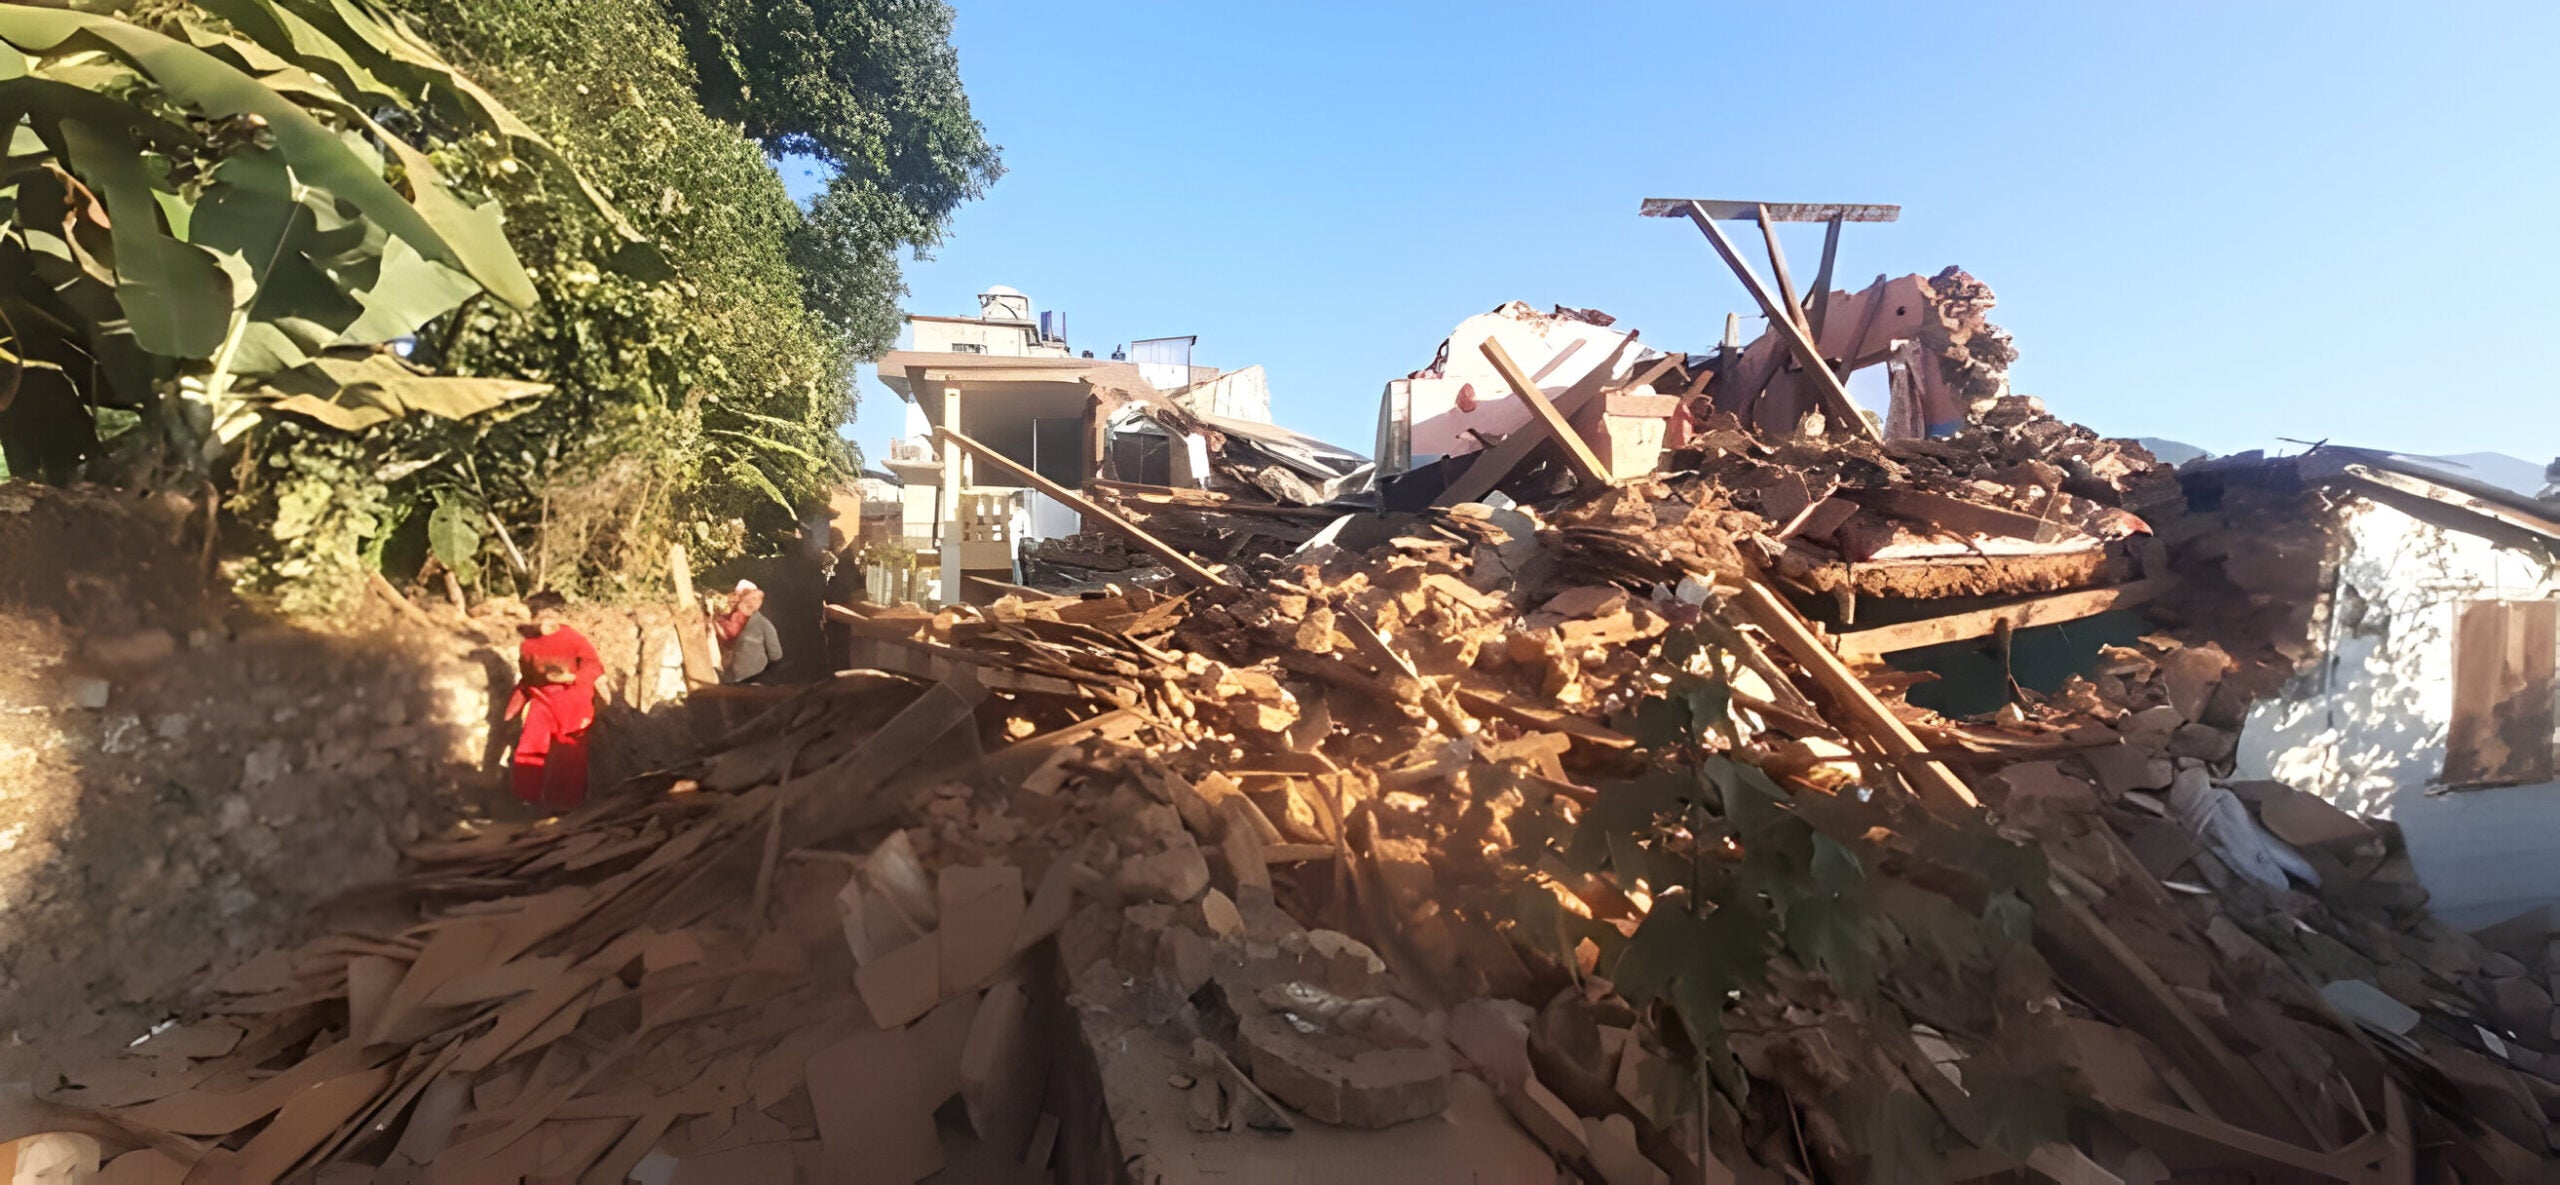 Image of destroyed homes in foreground, blue sky in background